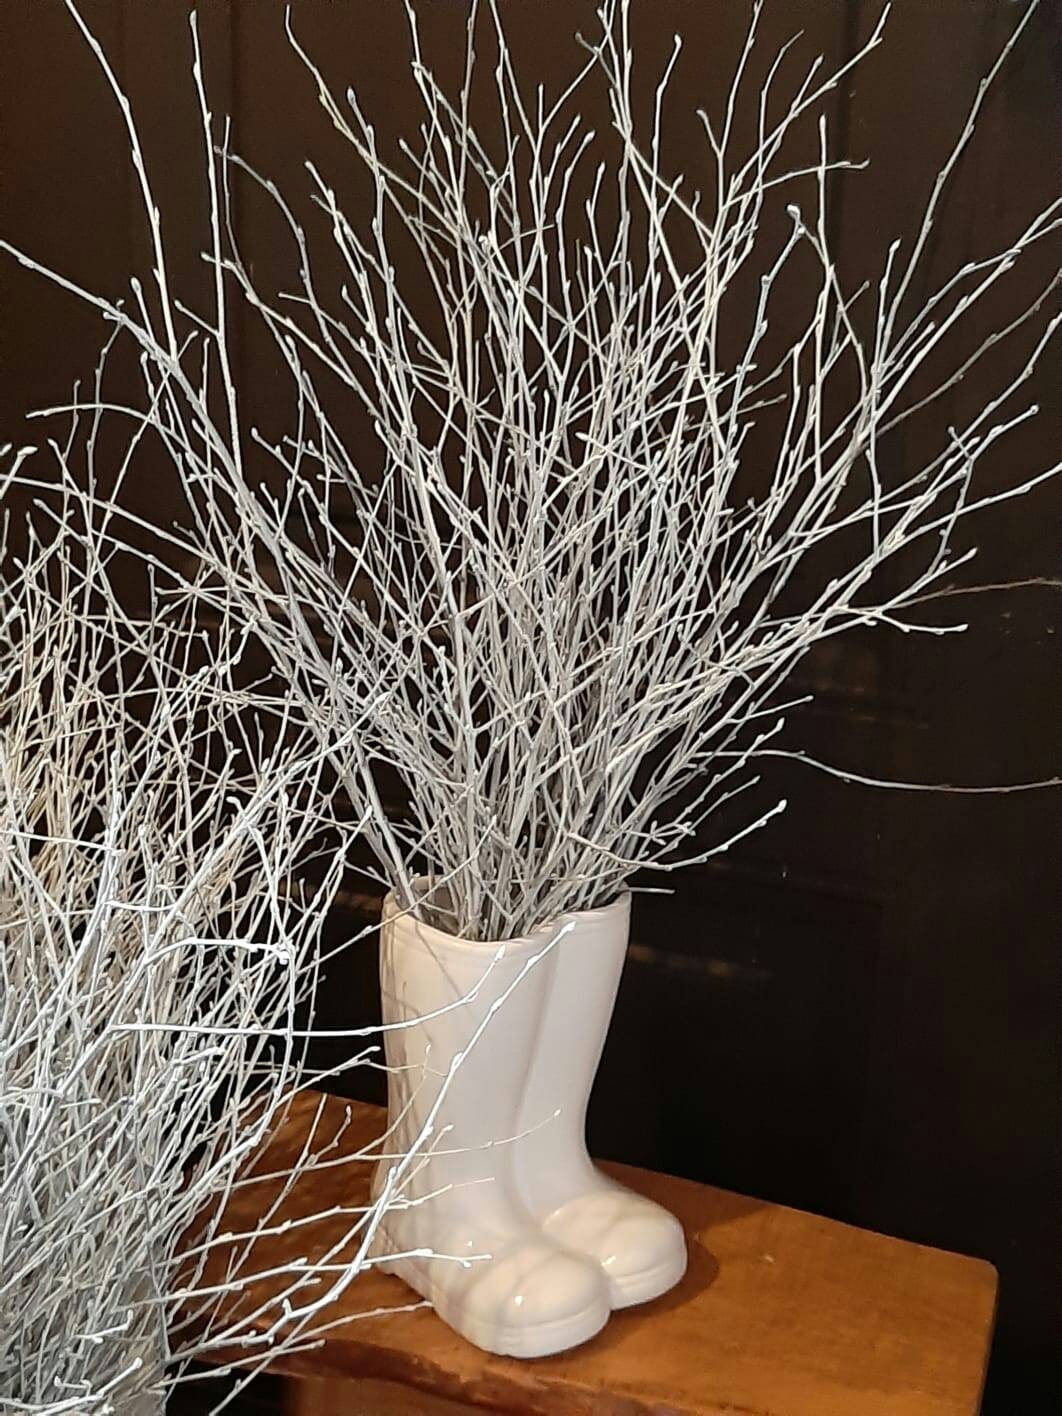 White Painted Tree Branches Scandinavian Style Home Decor Idea Natural Decorative  Twigs for Vase Filler Modern Minimalist Table Centerpiece 